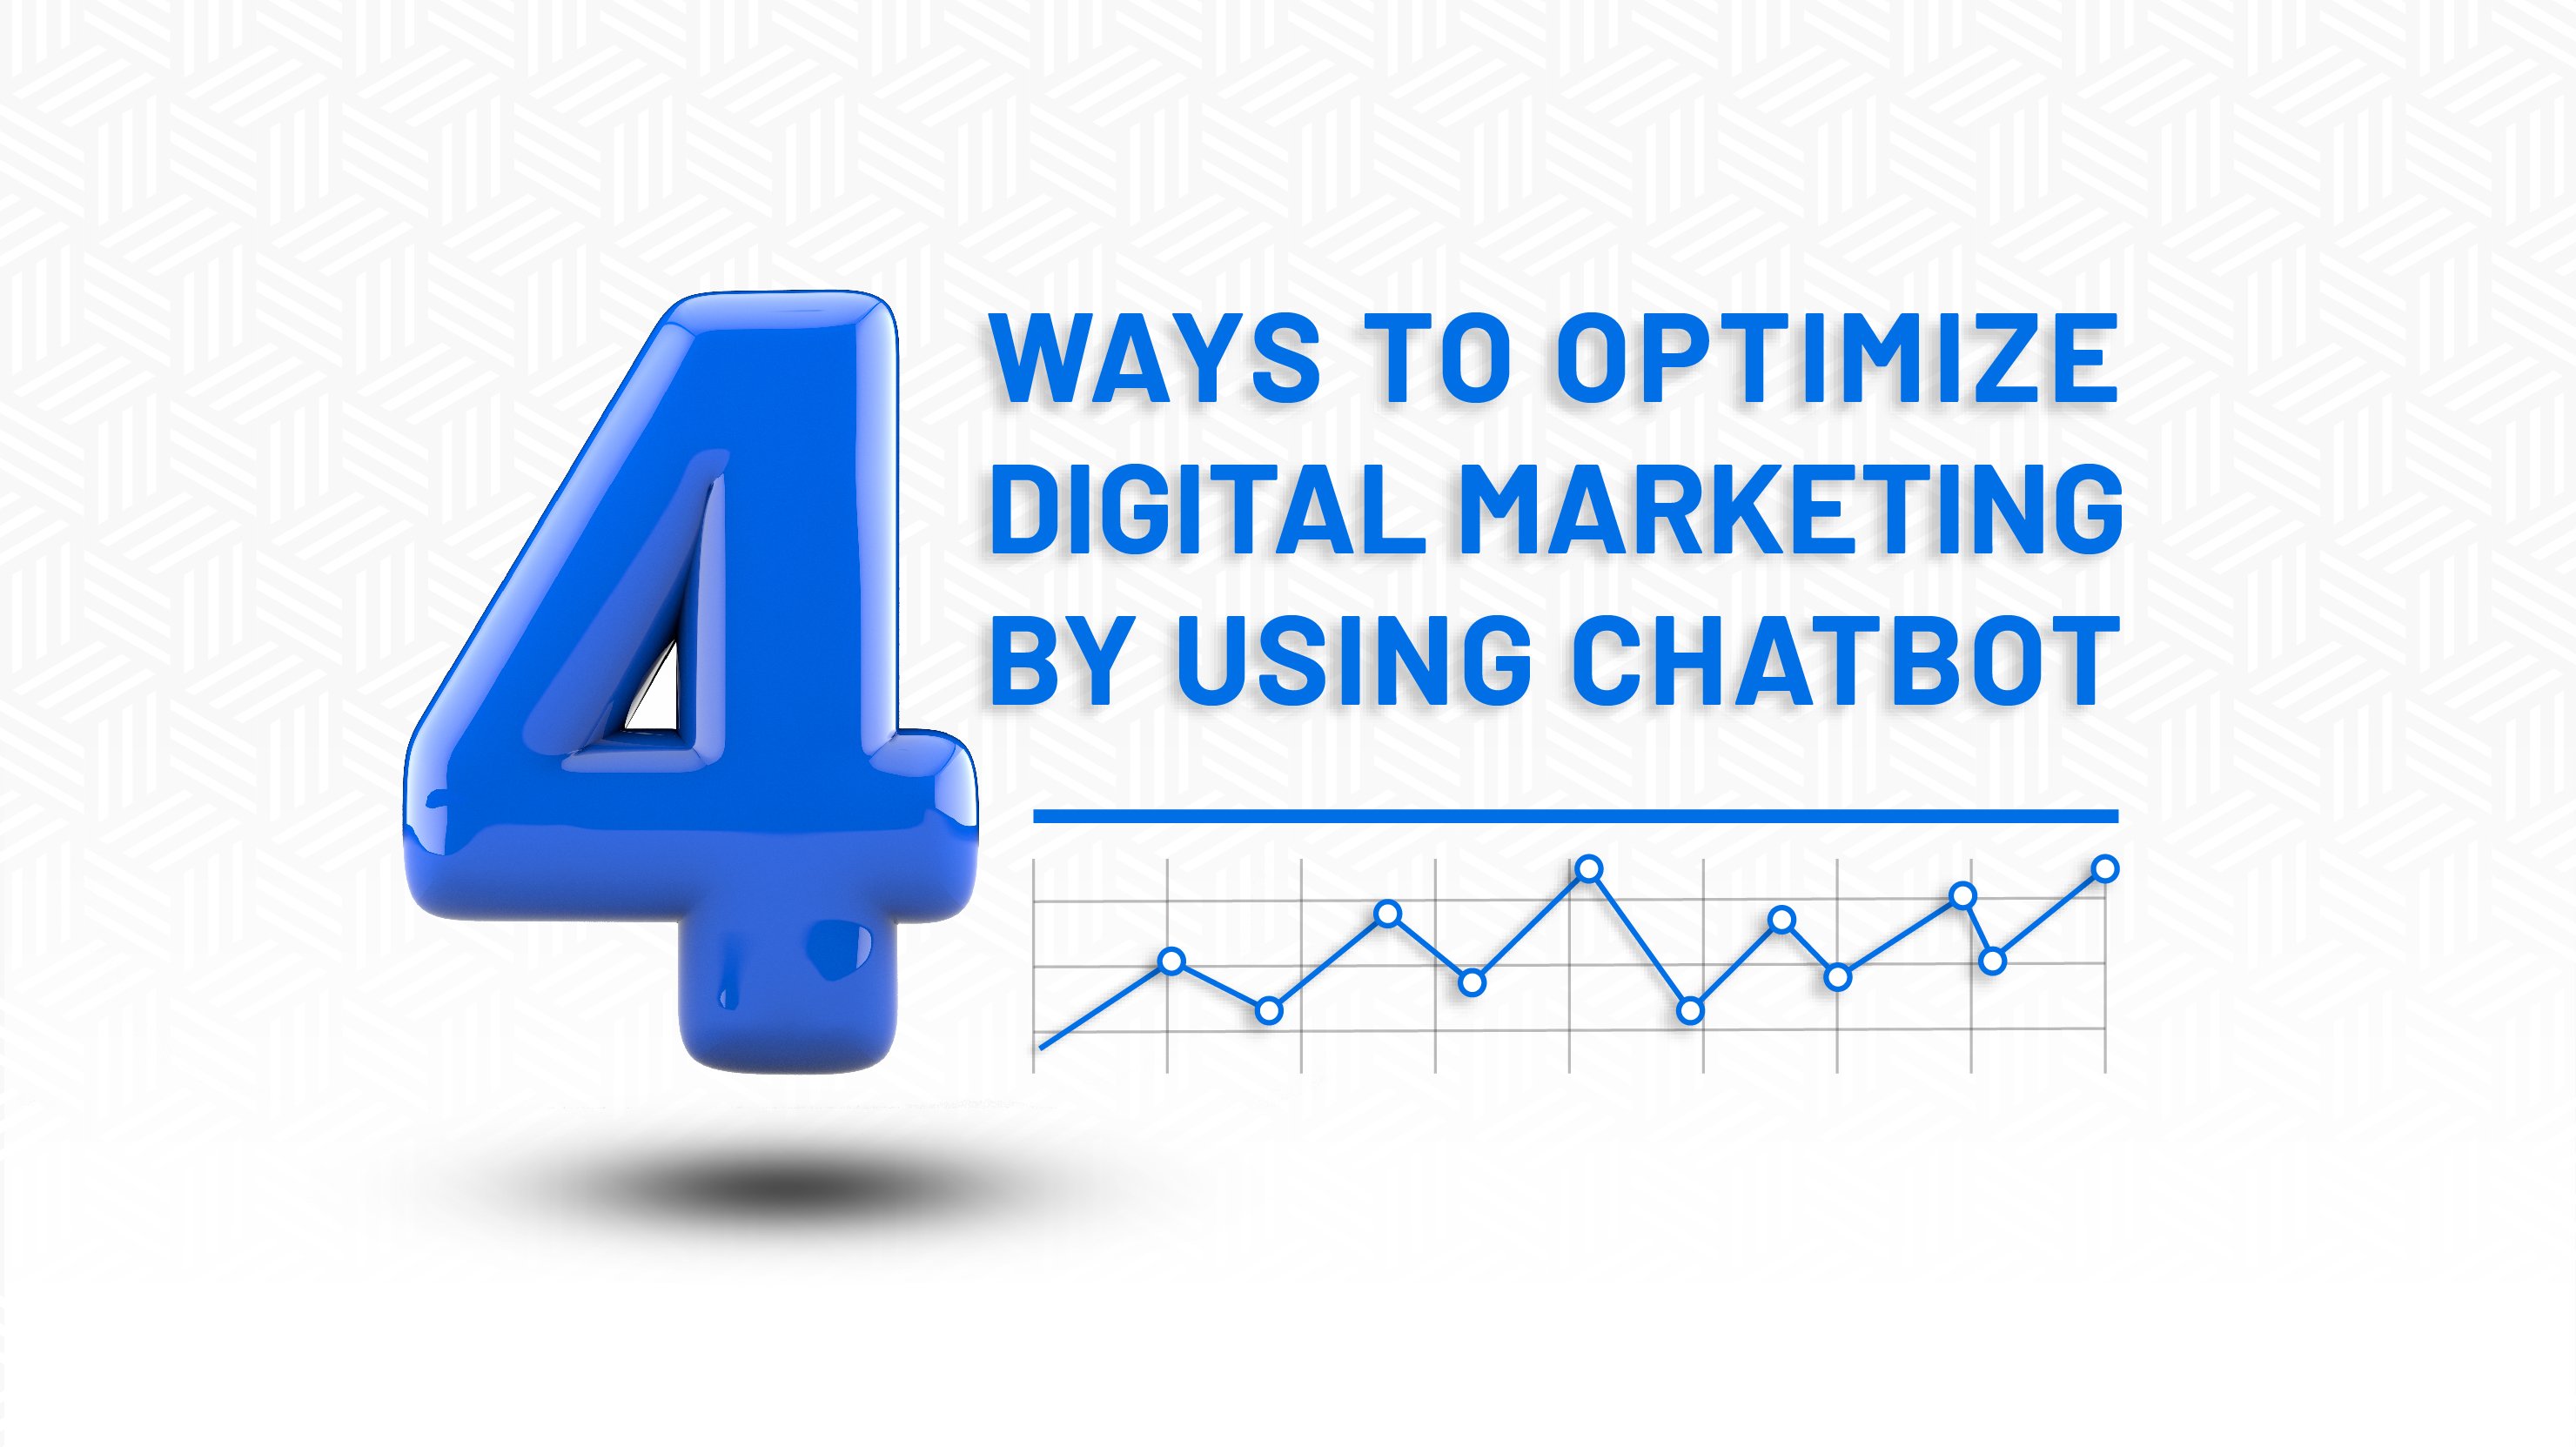 4 ways to optimize digital marketing in chatbot